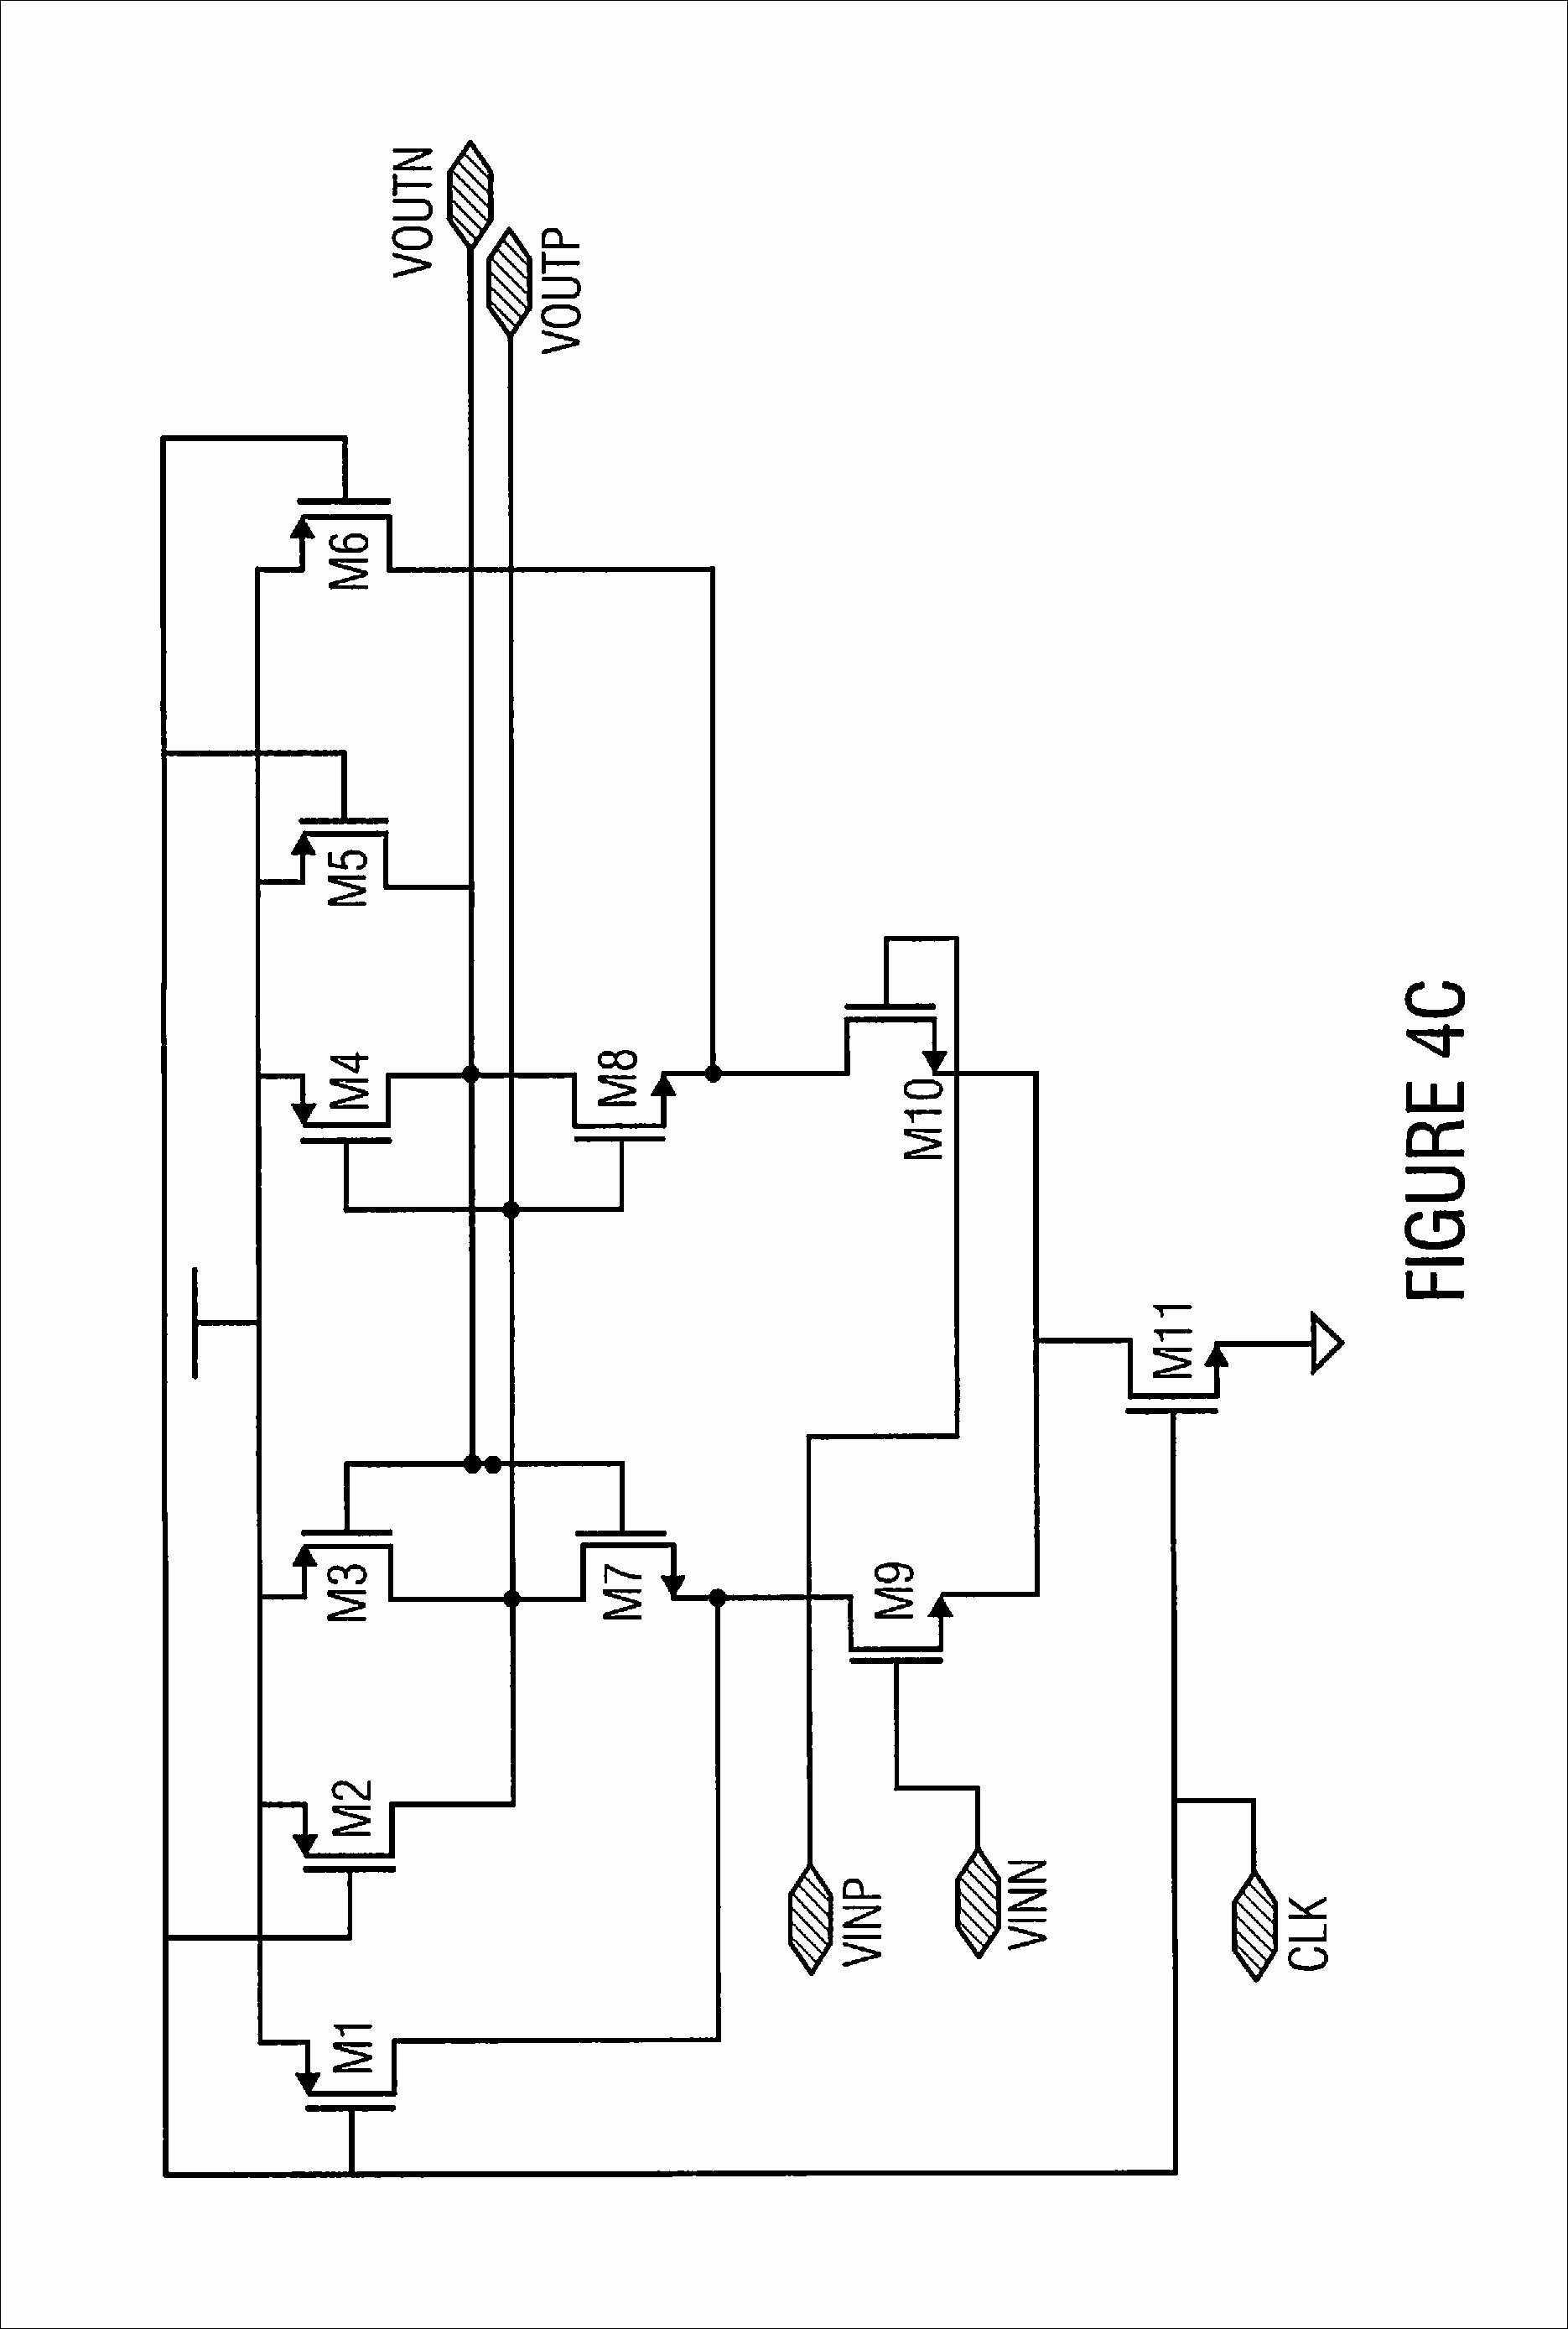 Ford 8n 12 Volt Conversion Wiring Diagram Awesome 6 Volt to 12 Volt Conversion Wiring Diagram